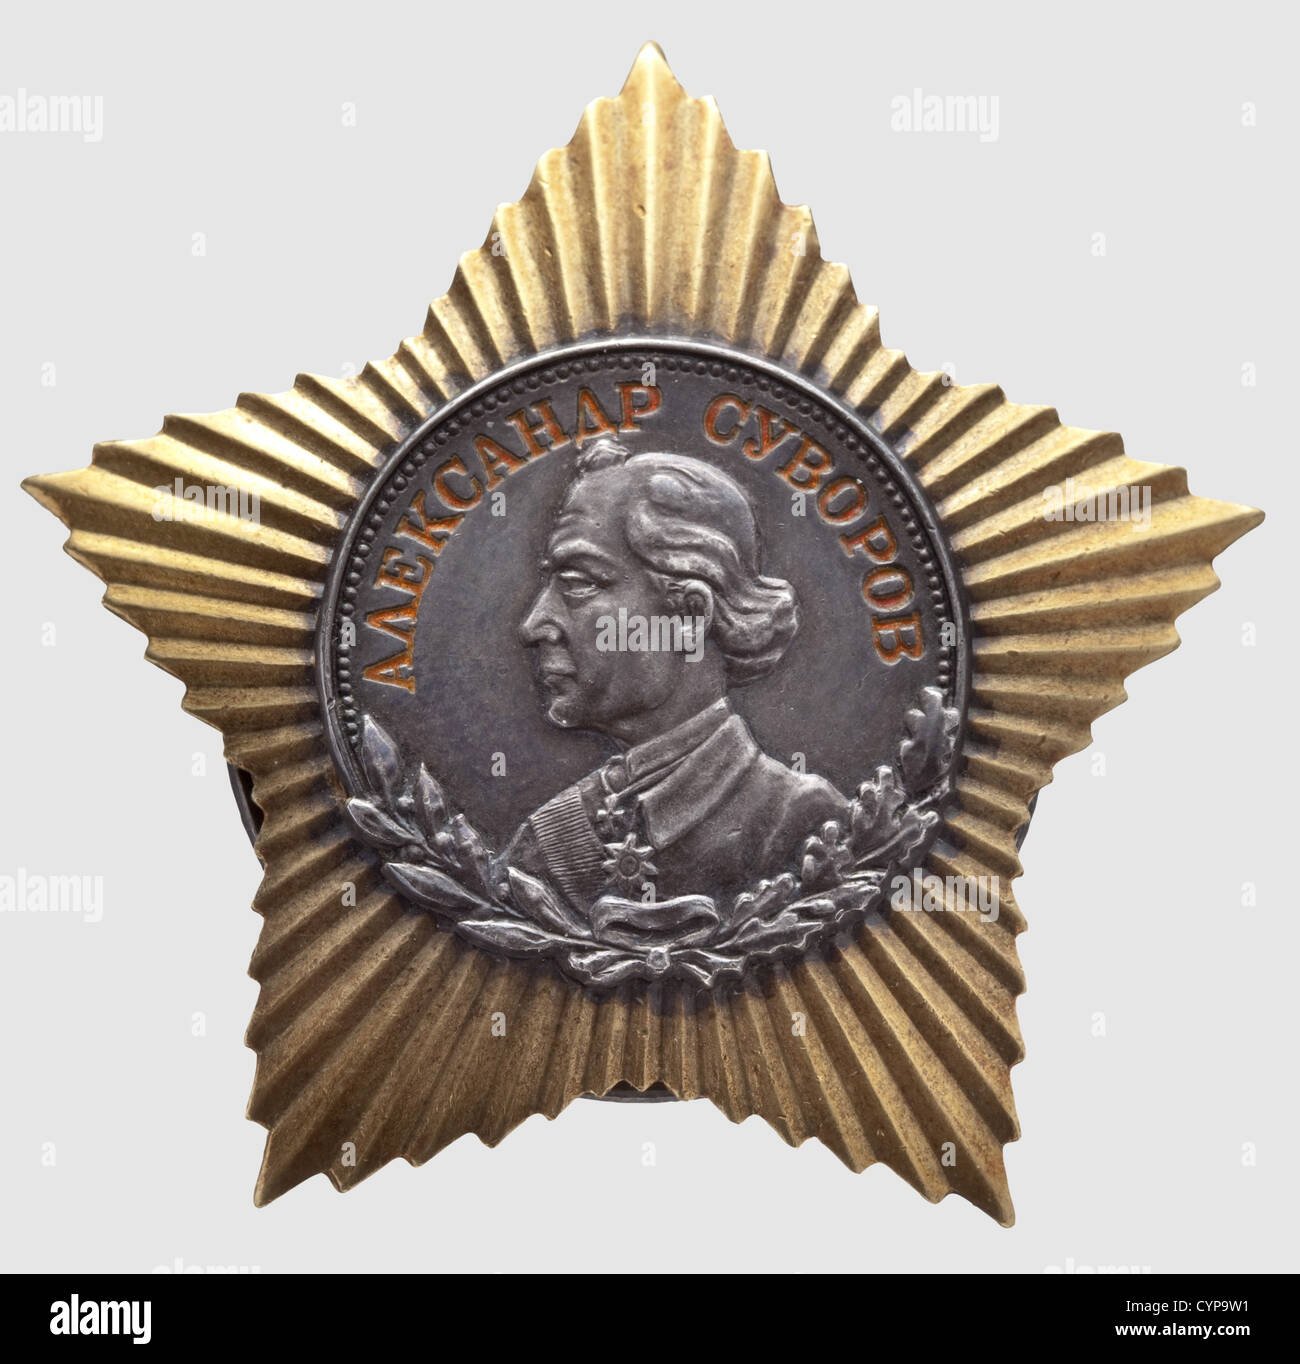 Order of Suvorov, 2nd Class, 2nd Type. Gold, silver, enamelled inscription. Threaded disc attachment, the medallion with three rivets, star body with three segment cutouts, award number '2364'. Cf. Hermann Historica, auction 38, lot 1439, historic, historical, people, 20th century, medal, decoration, medals, decorations, badge of honour, badge of honor, badges of honour, badges of honor, object, objects, stills, clipping, clippings, cut out, cut-out, cut-outs, Additional-Rights-Clearences-Not Available Stock Photo